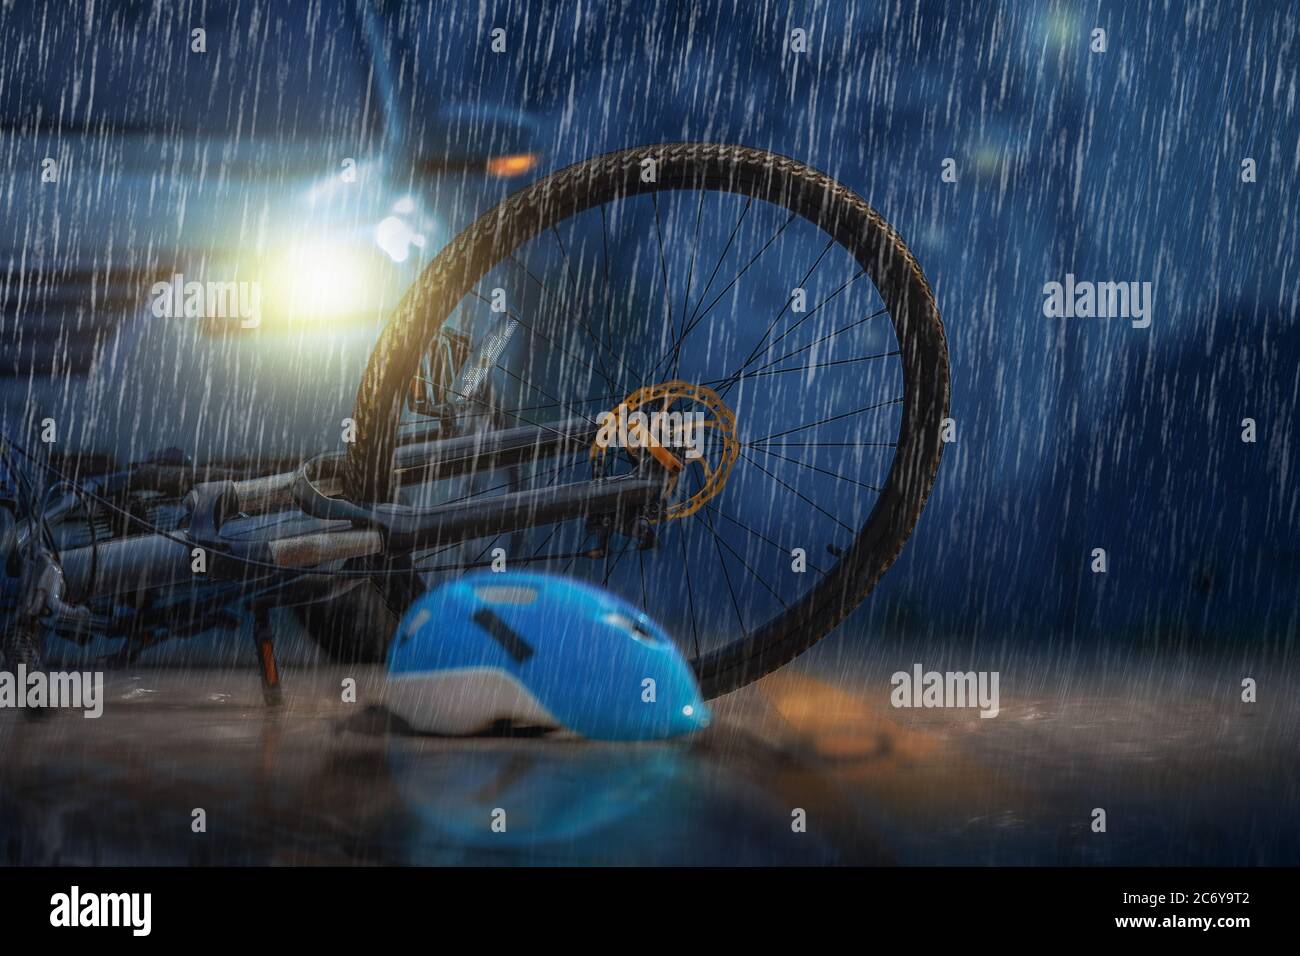 Accident car crash with bicycle on road in rainy weather Stock Photo